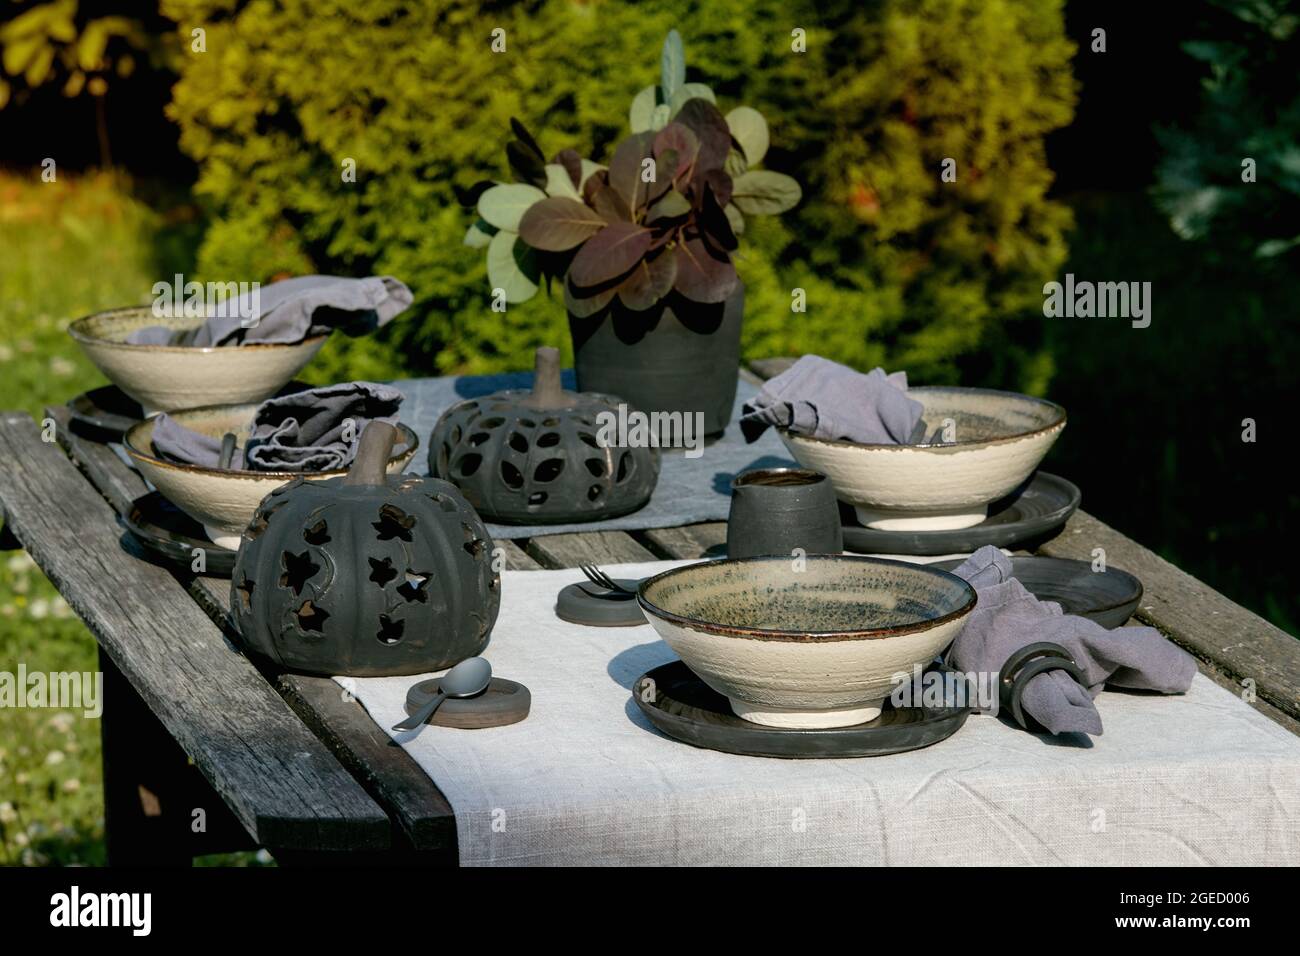 Rustic table setting outside in garden with empty craft ceramic tableware Stock Photo